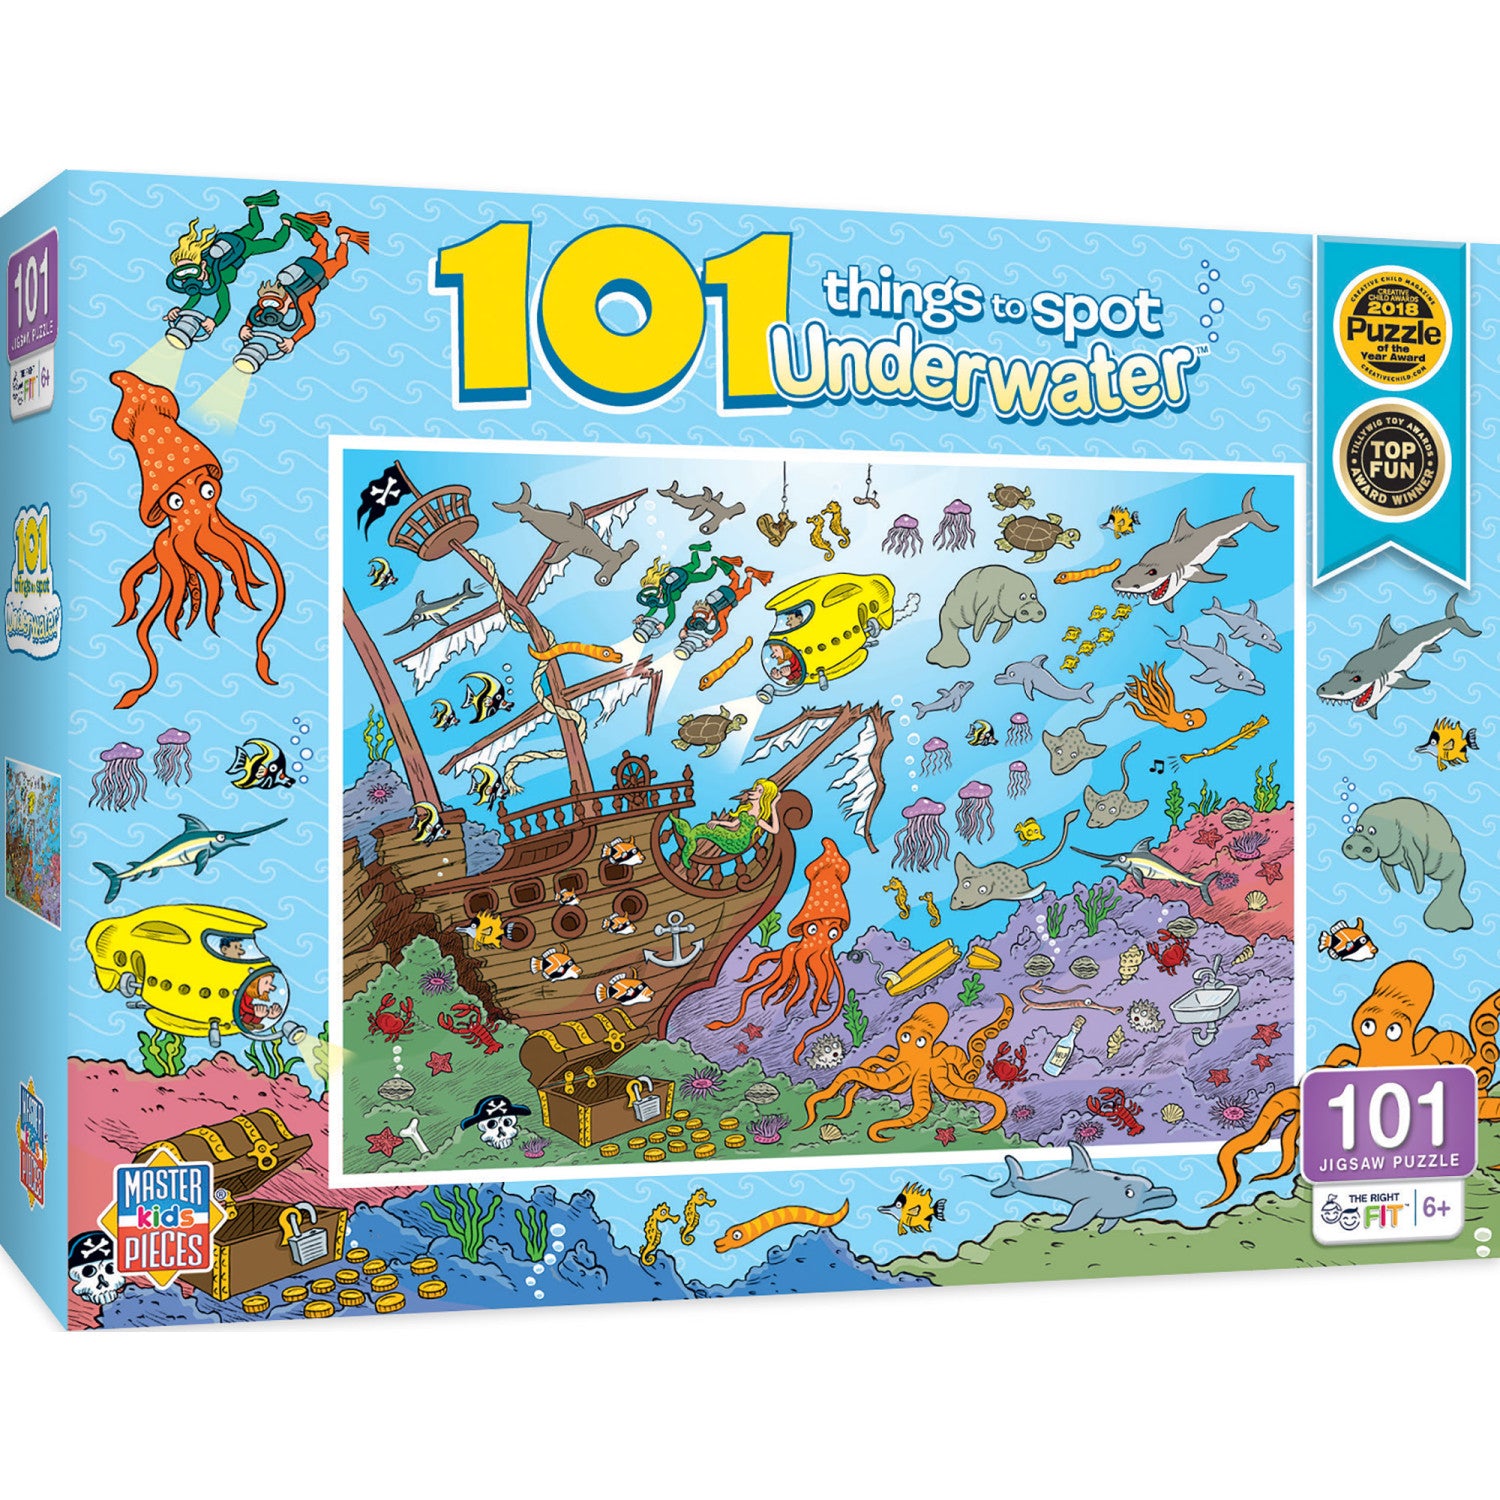 101 Things to Spot Underwater - 101 Piece Jigsaw Puzzle